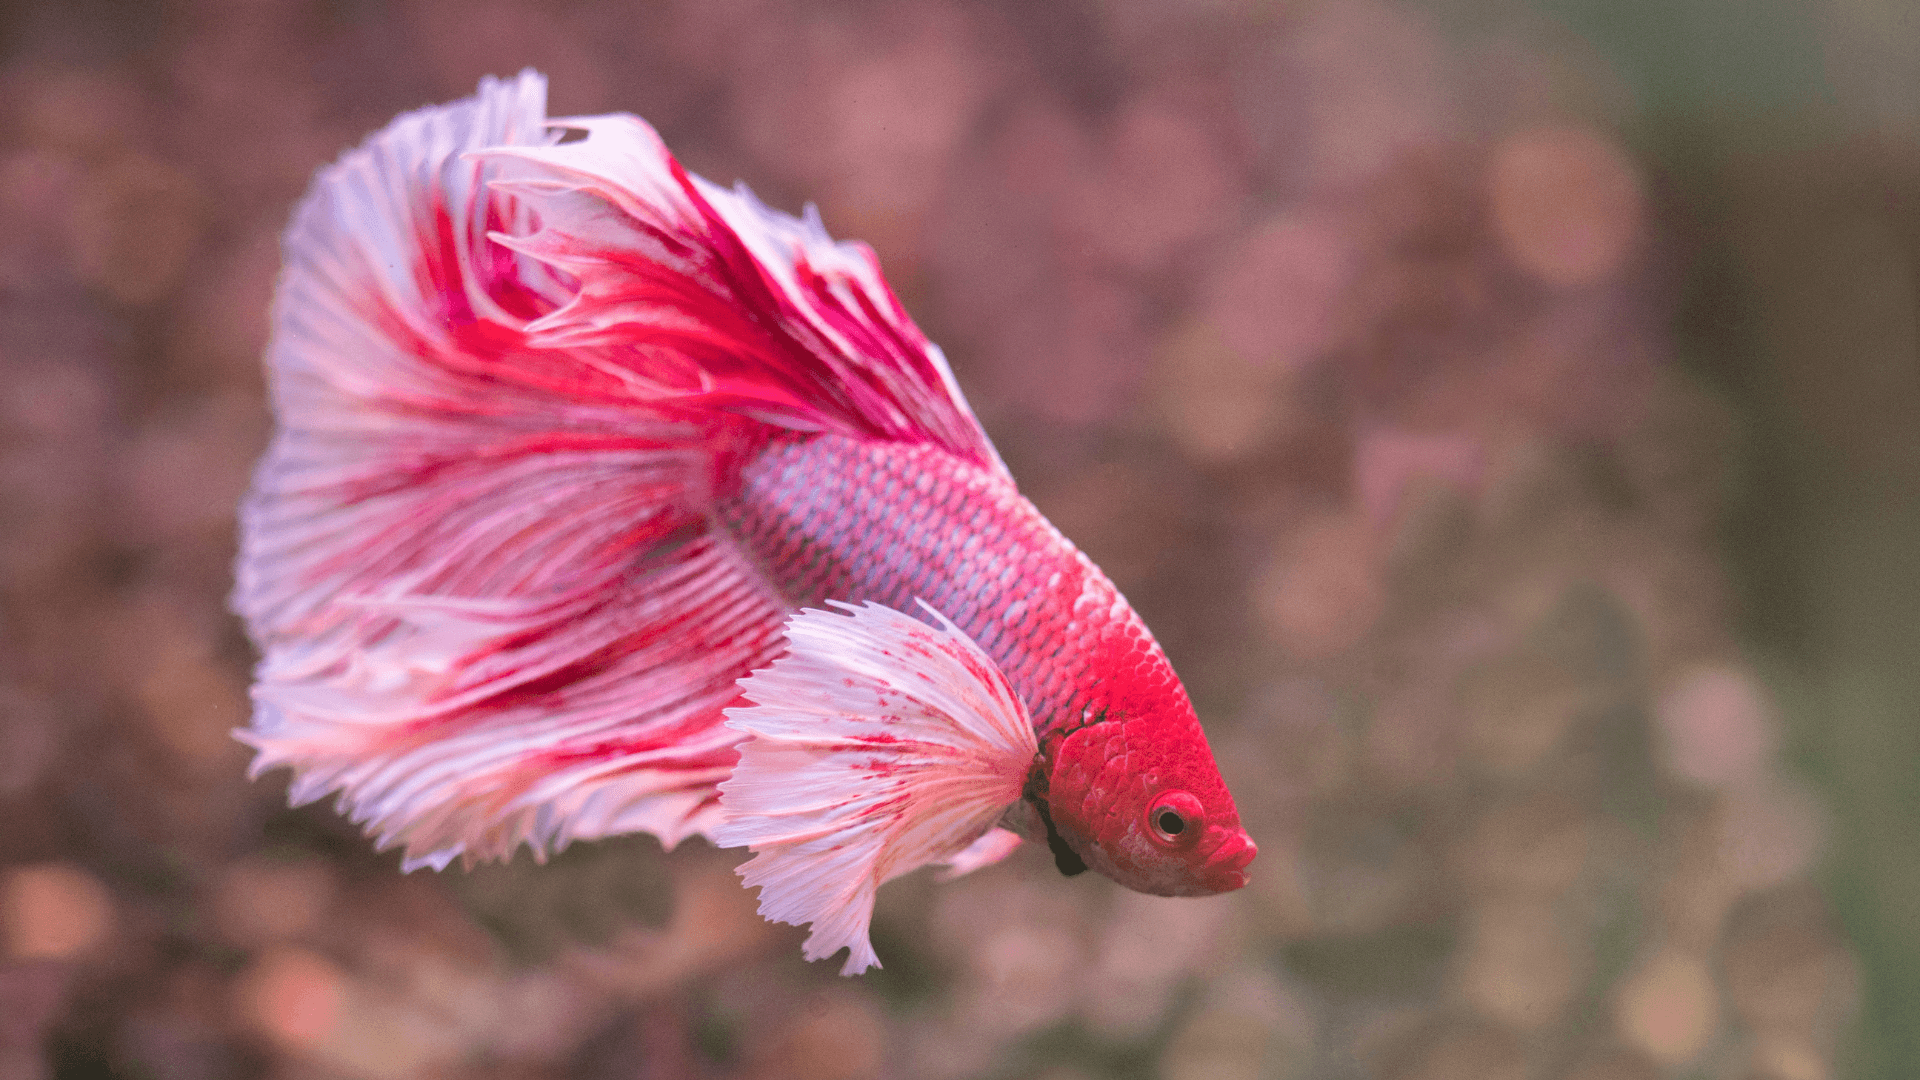 A photo of The Unique Ability of Labyrinth Fish